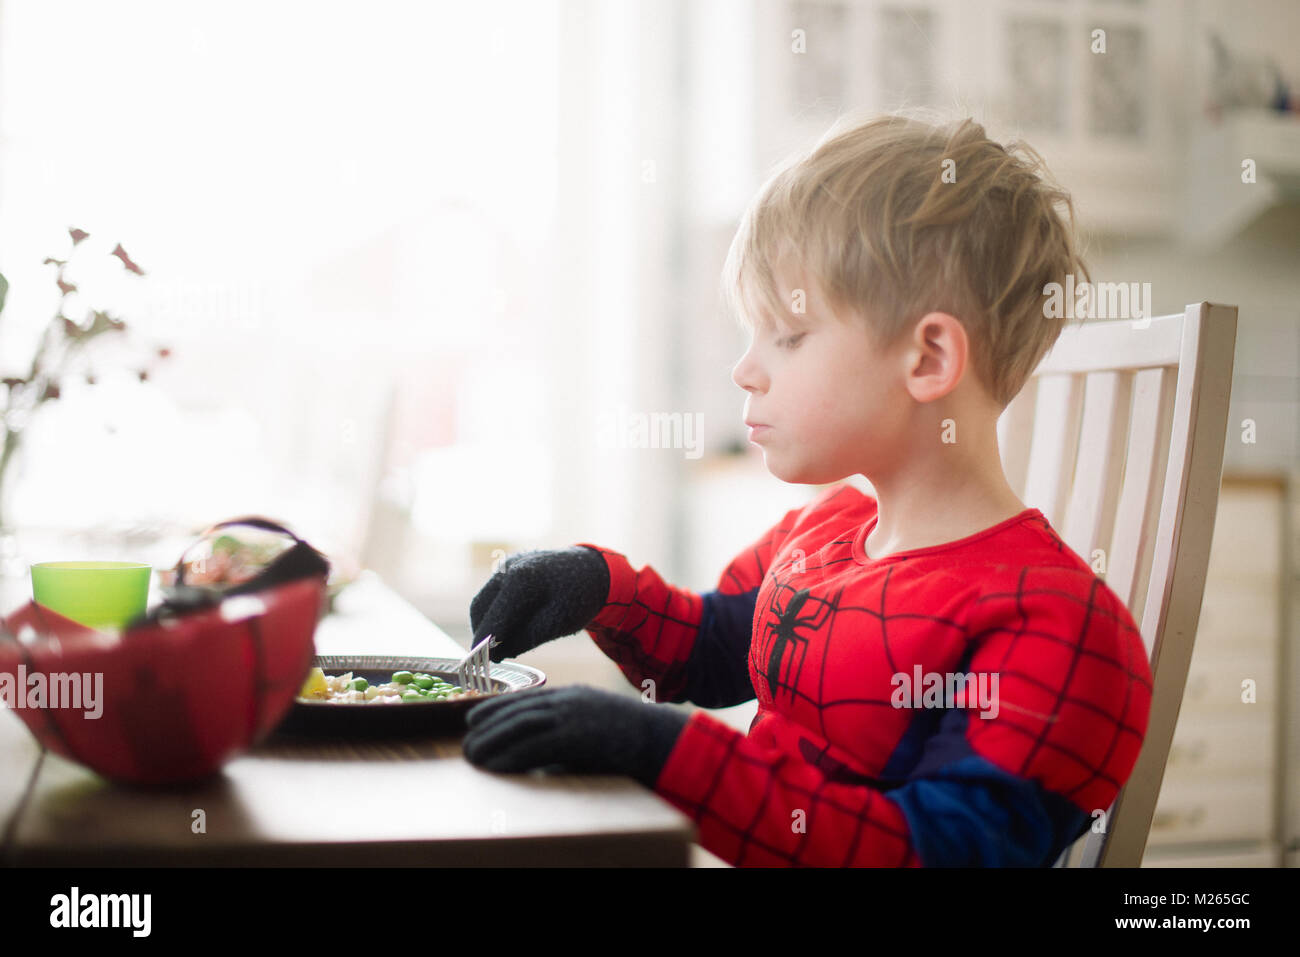 Scandinavian boy eating his lunch in a spider man costume. Stock Photo